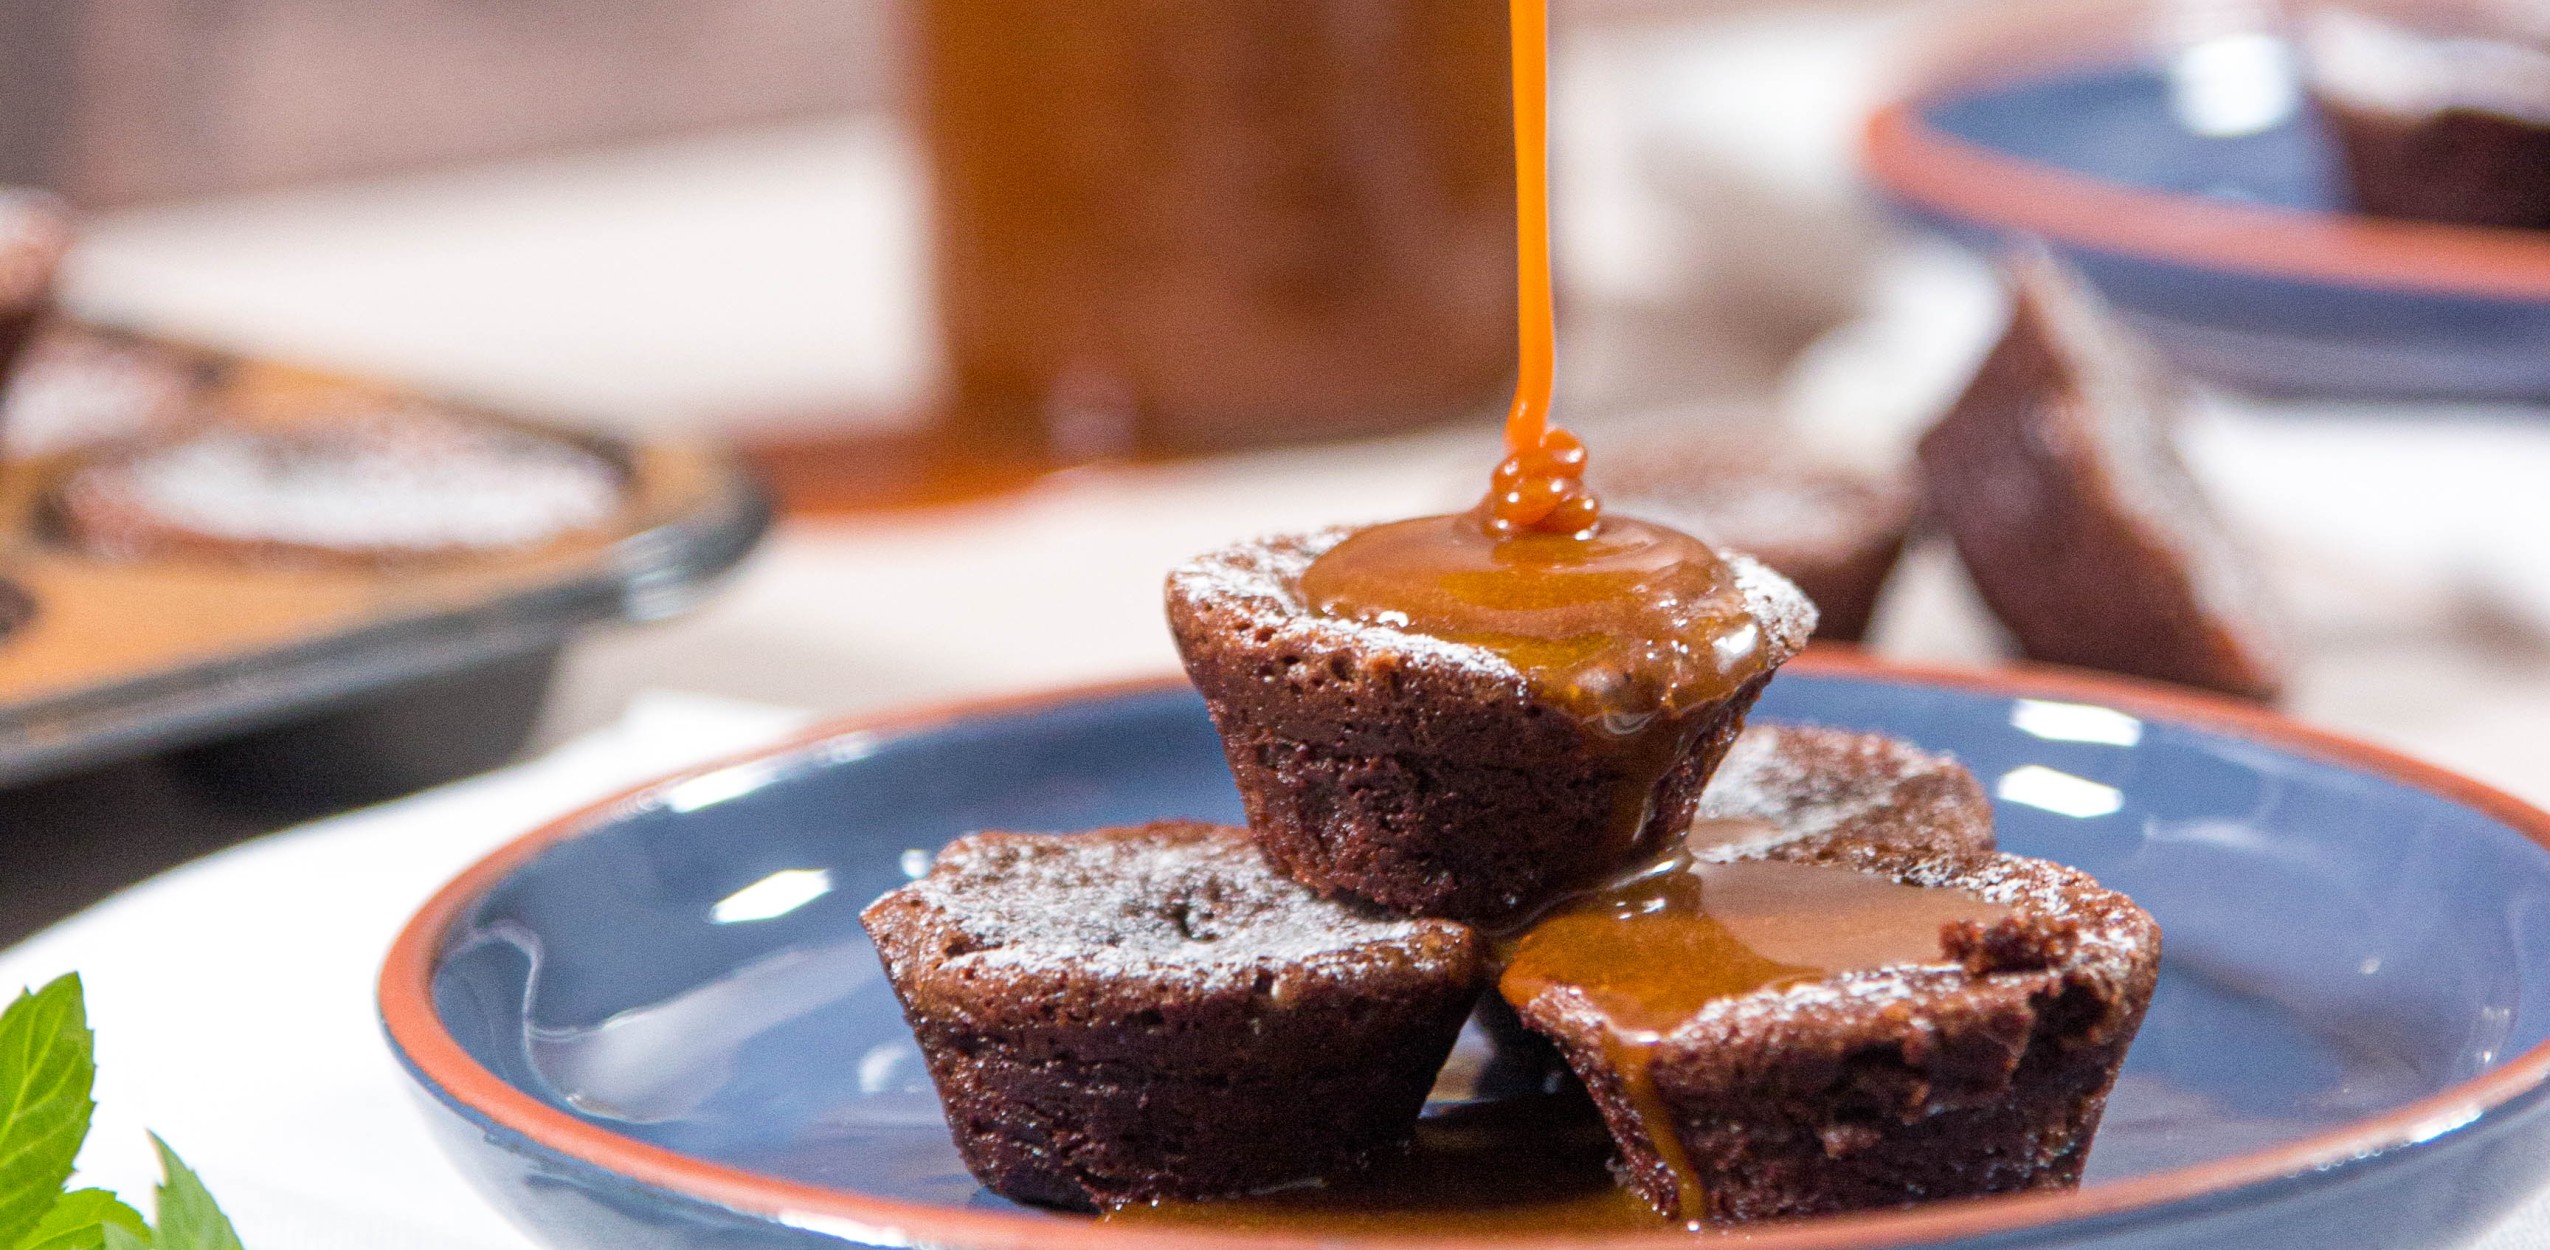 Small brownie with caramel drizzle